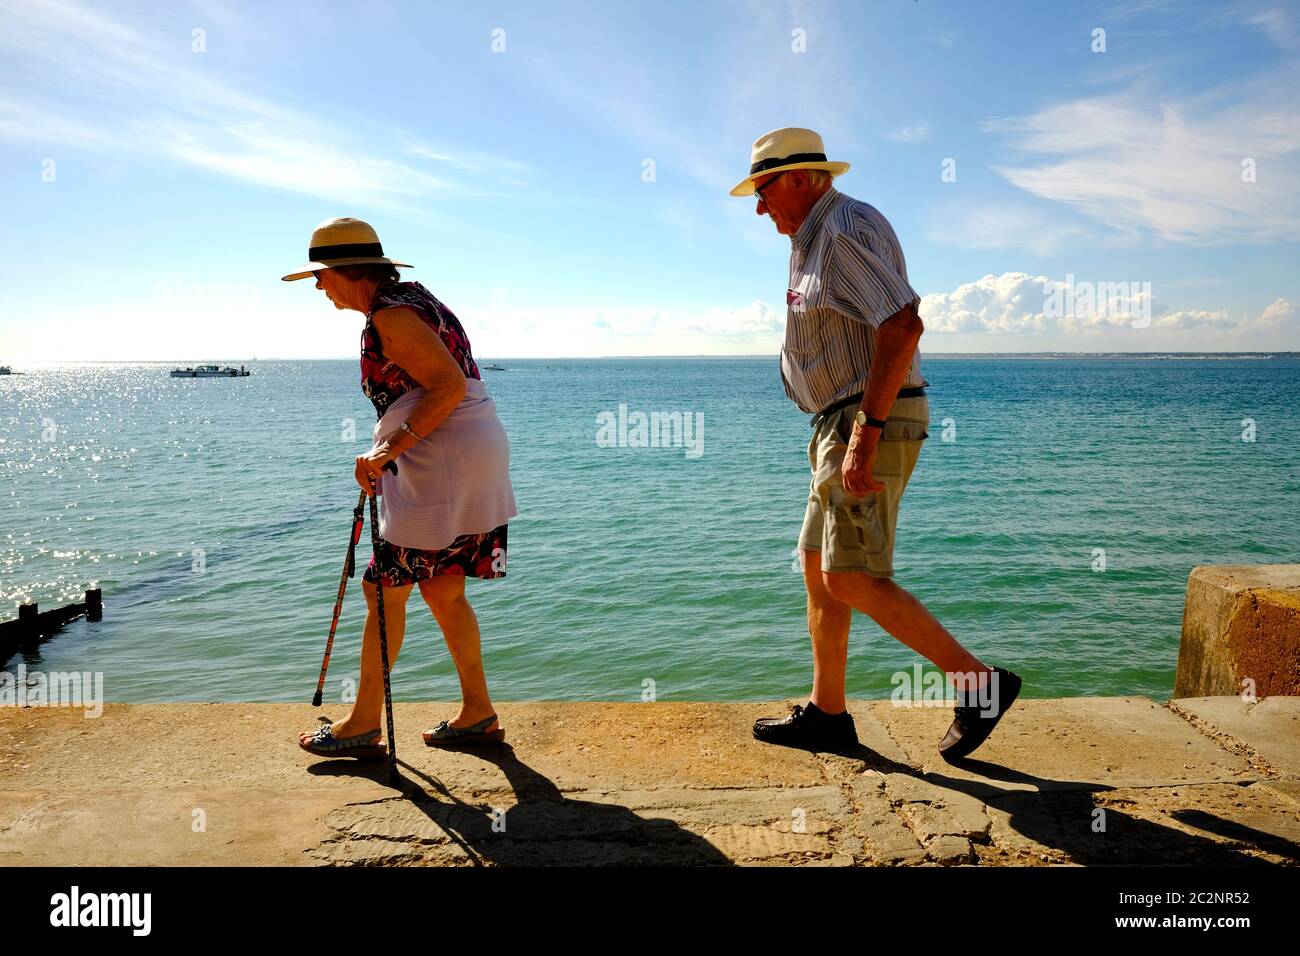 Elderly couple going for a walk along the seafront revetment promenade Totland Bay Isle of Wight Stock Photo